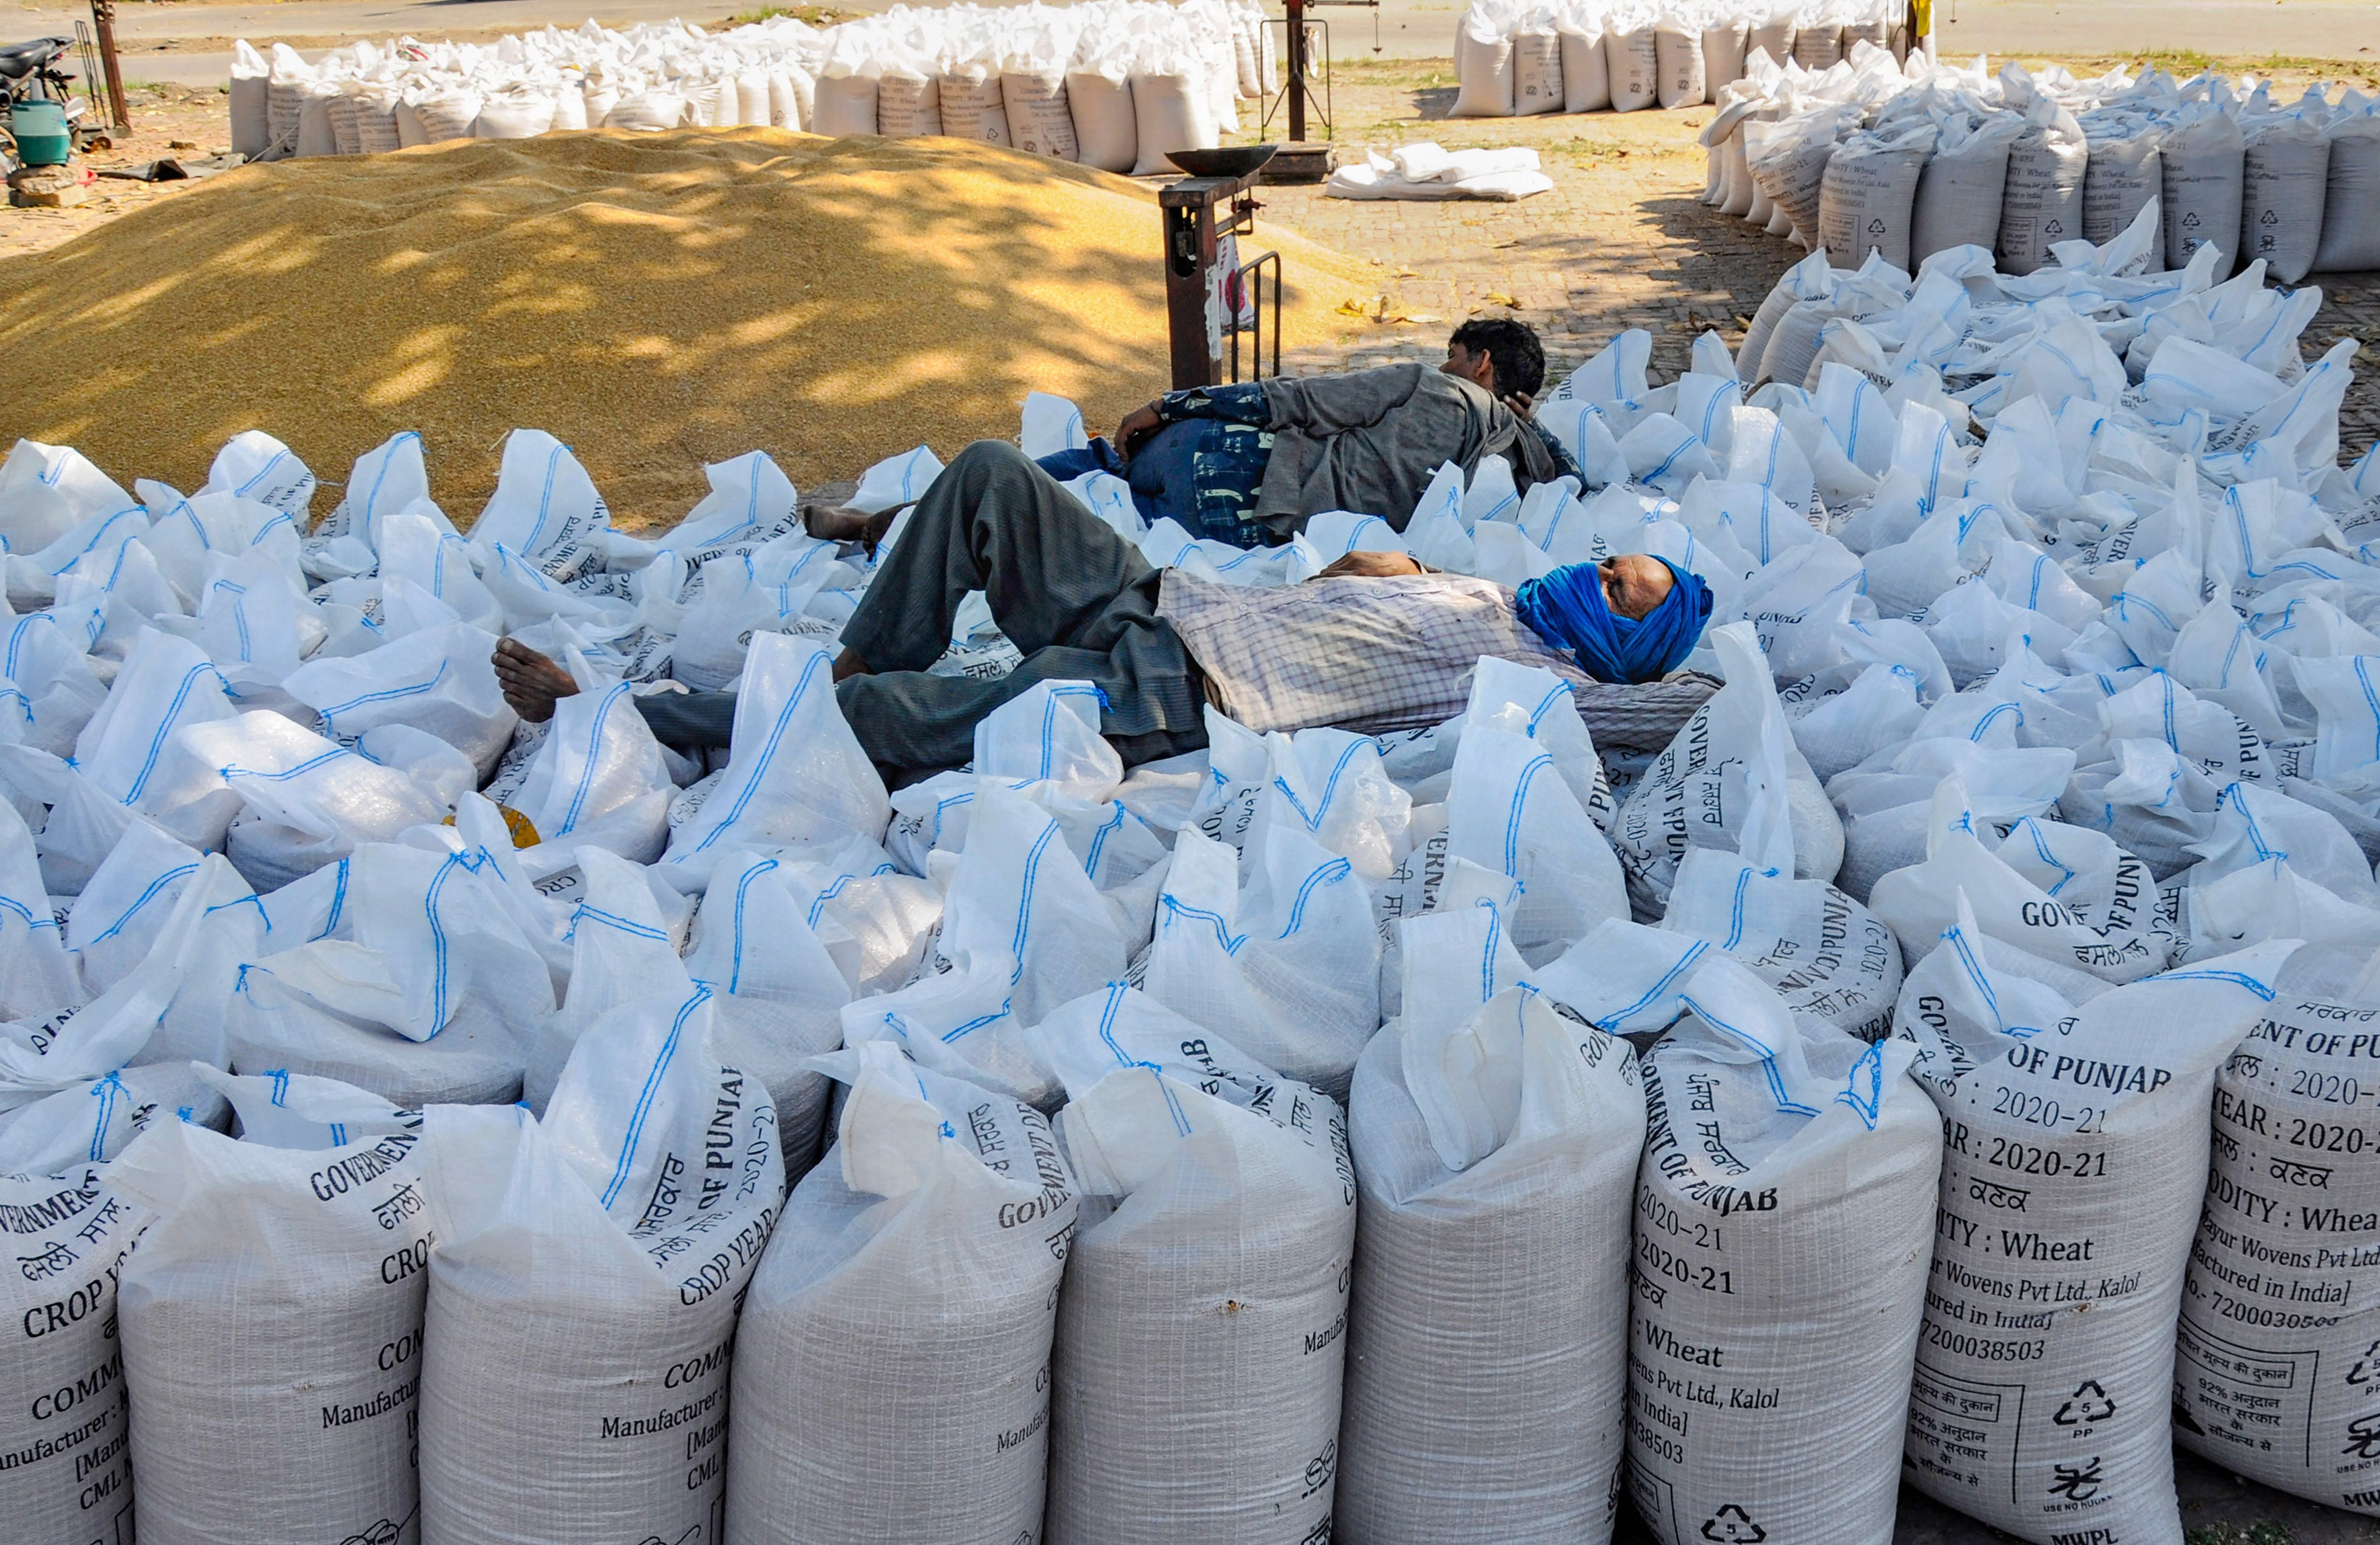 Workers take rest on the sacks of harvested wheat grains at a grain market, during the nationwide lockdown, in Amritsar, Thursday, April 23, 2020. 